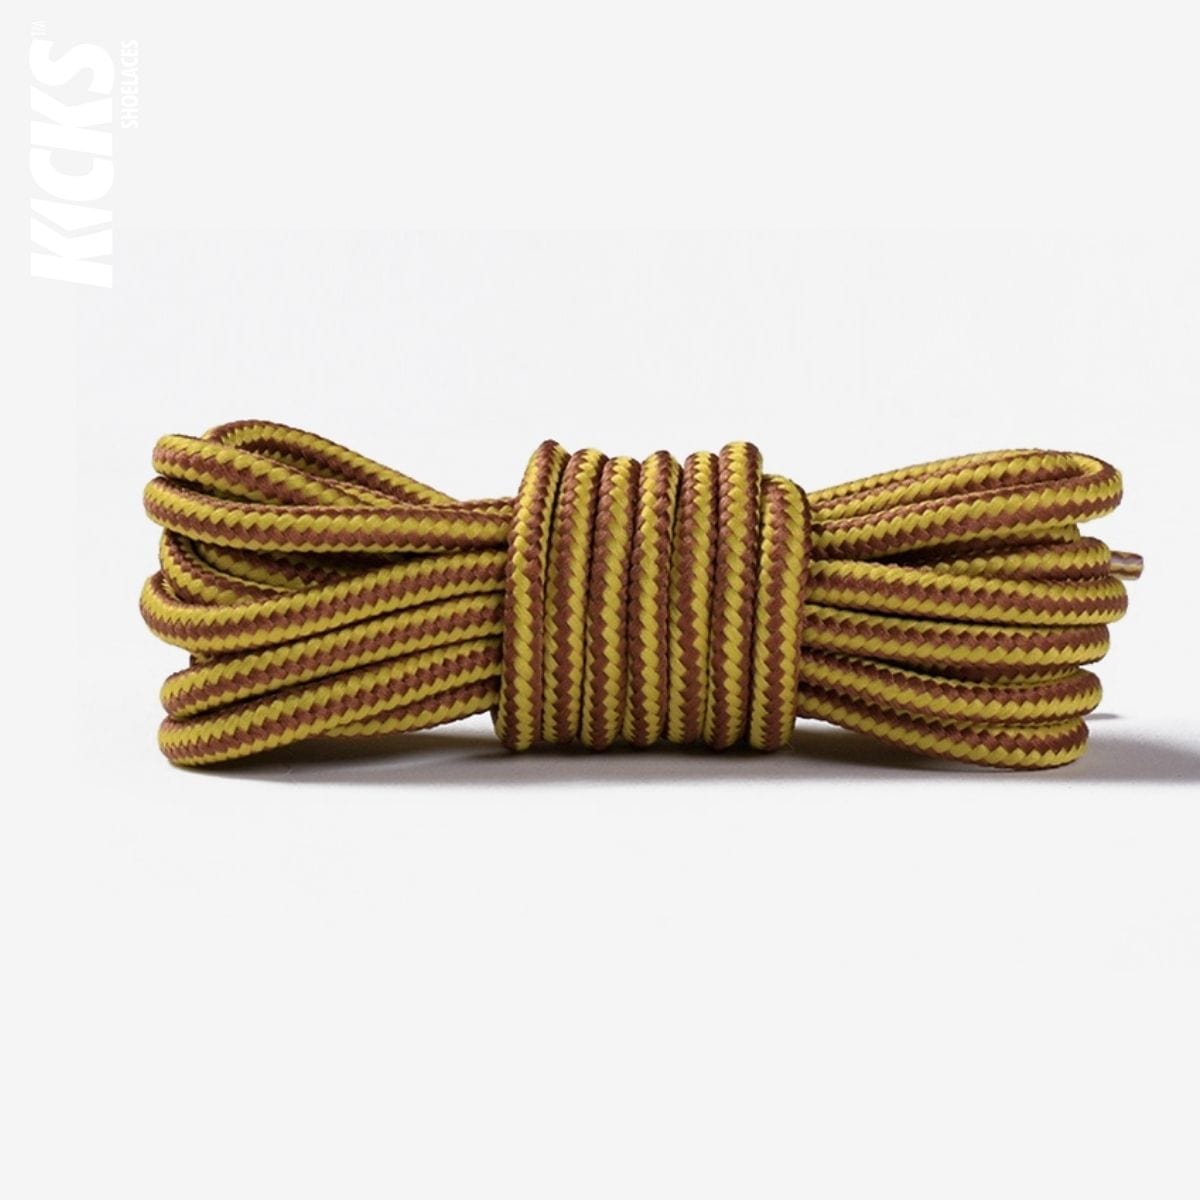 striped-two-color-shoelaces-for-casual-shoes-in-golden-yellow-and-brown